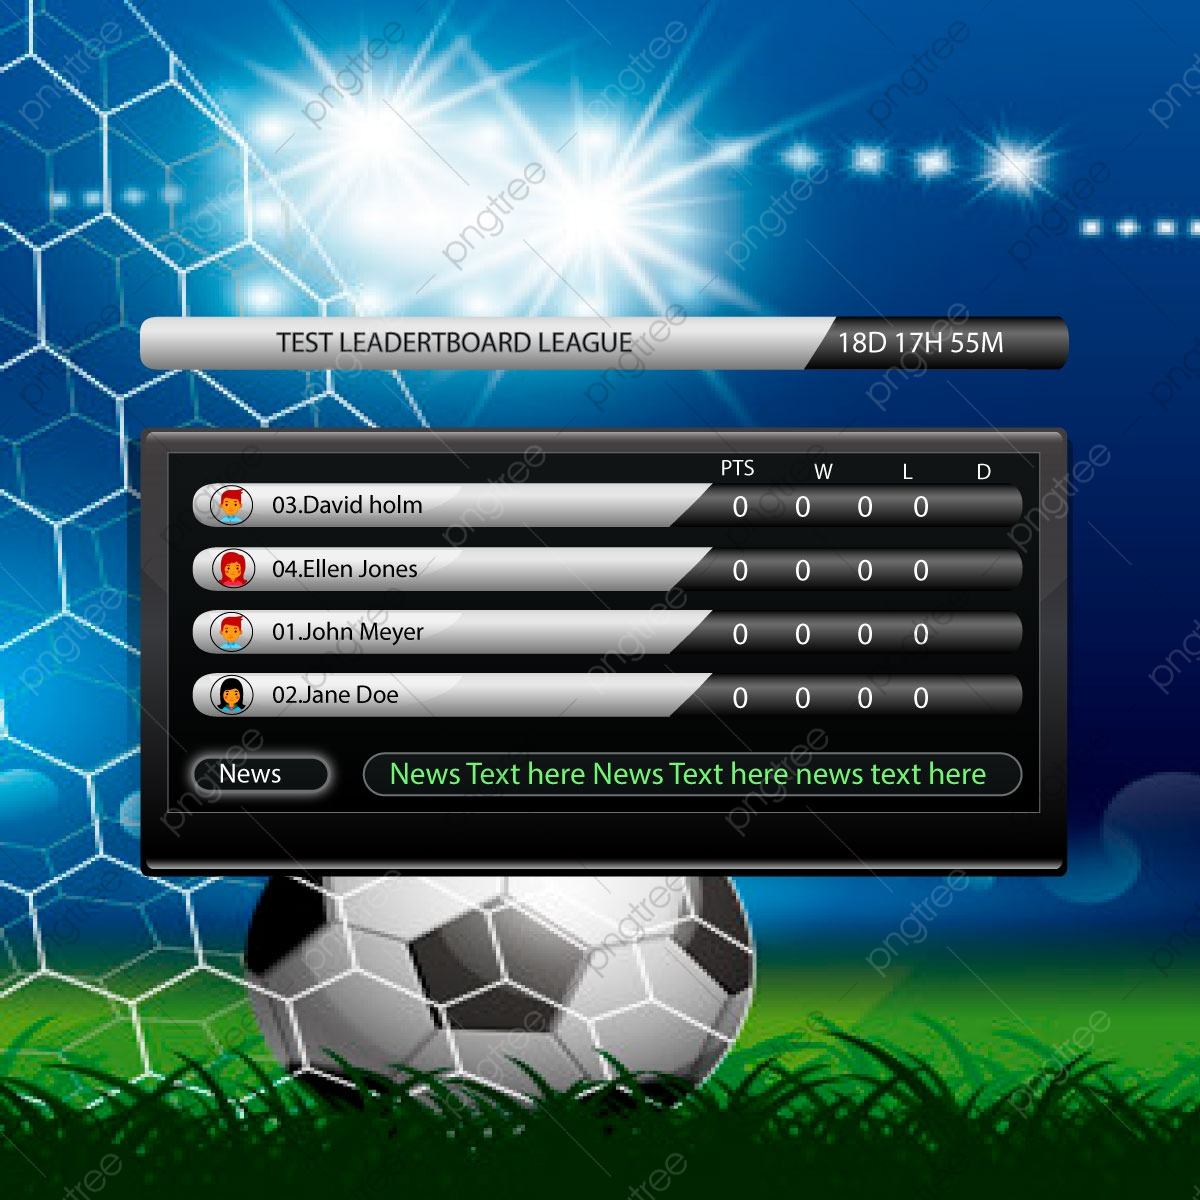 Soccer Game Score Board Template Download on Pngtree Intended For Soccer Report Card Template